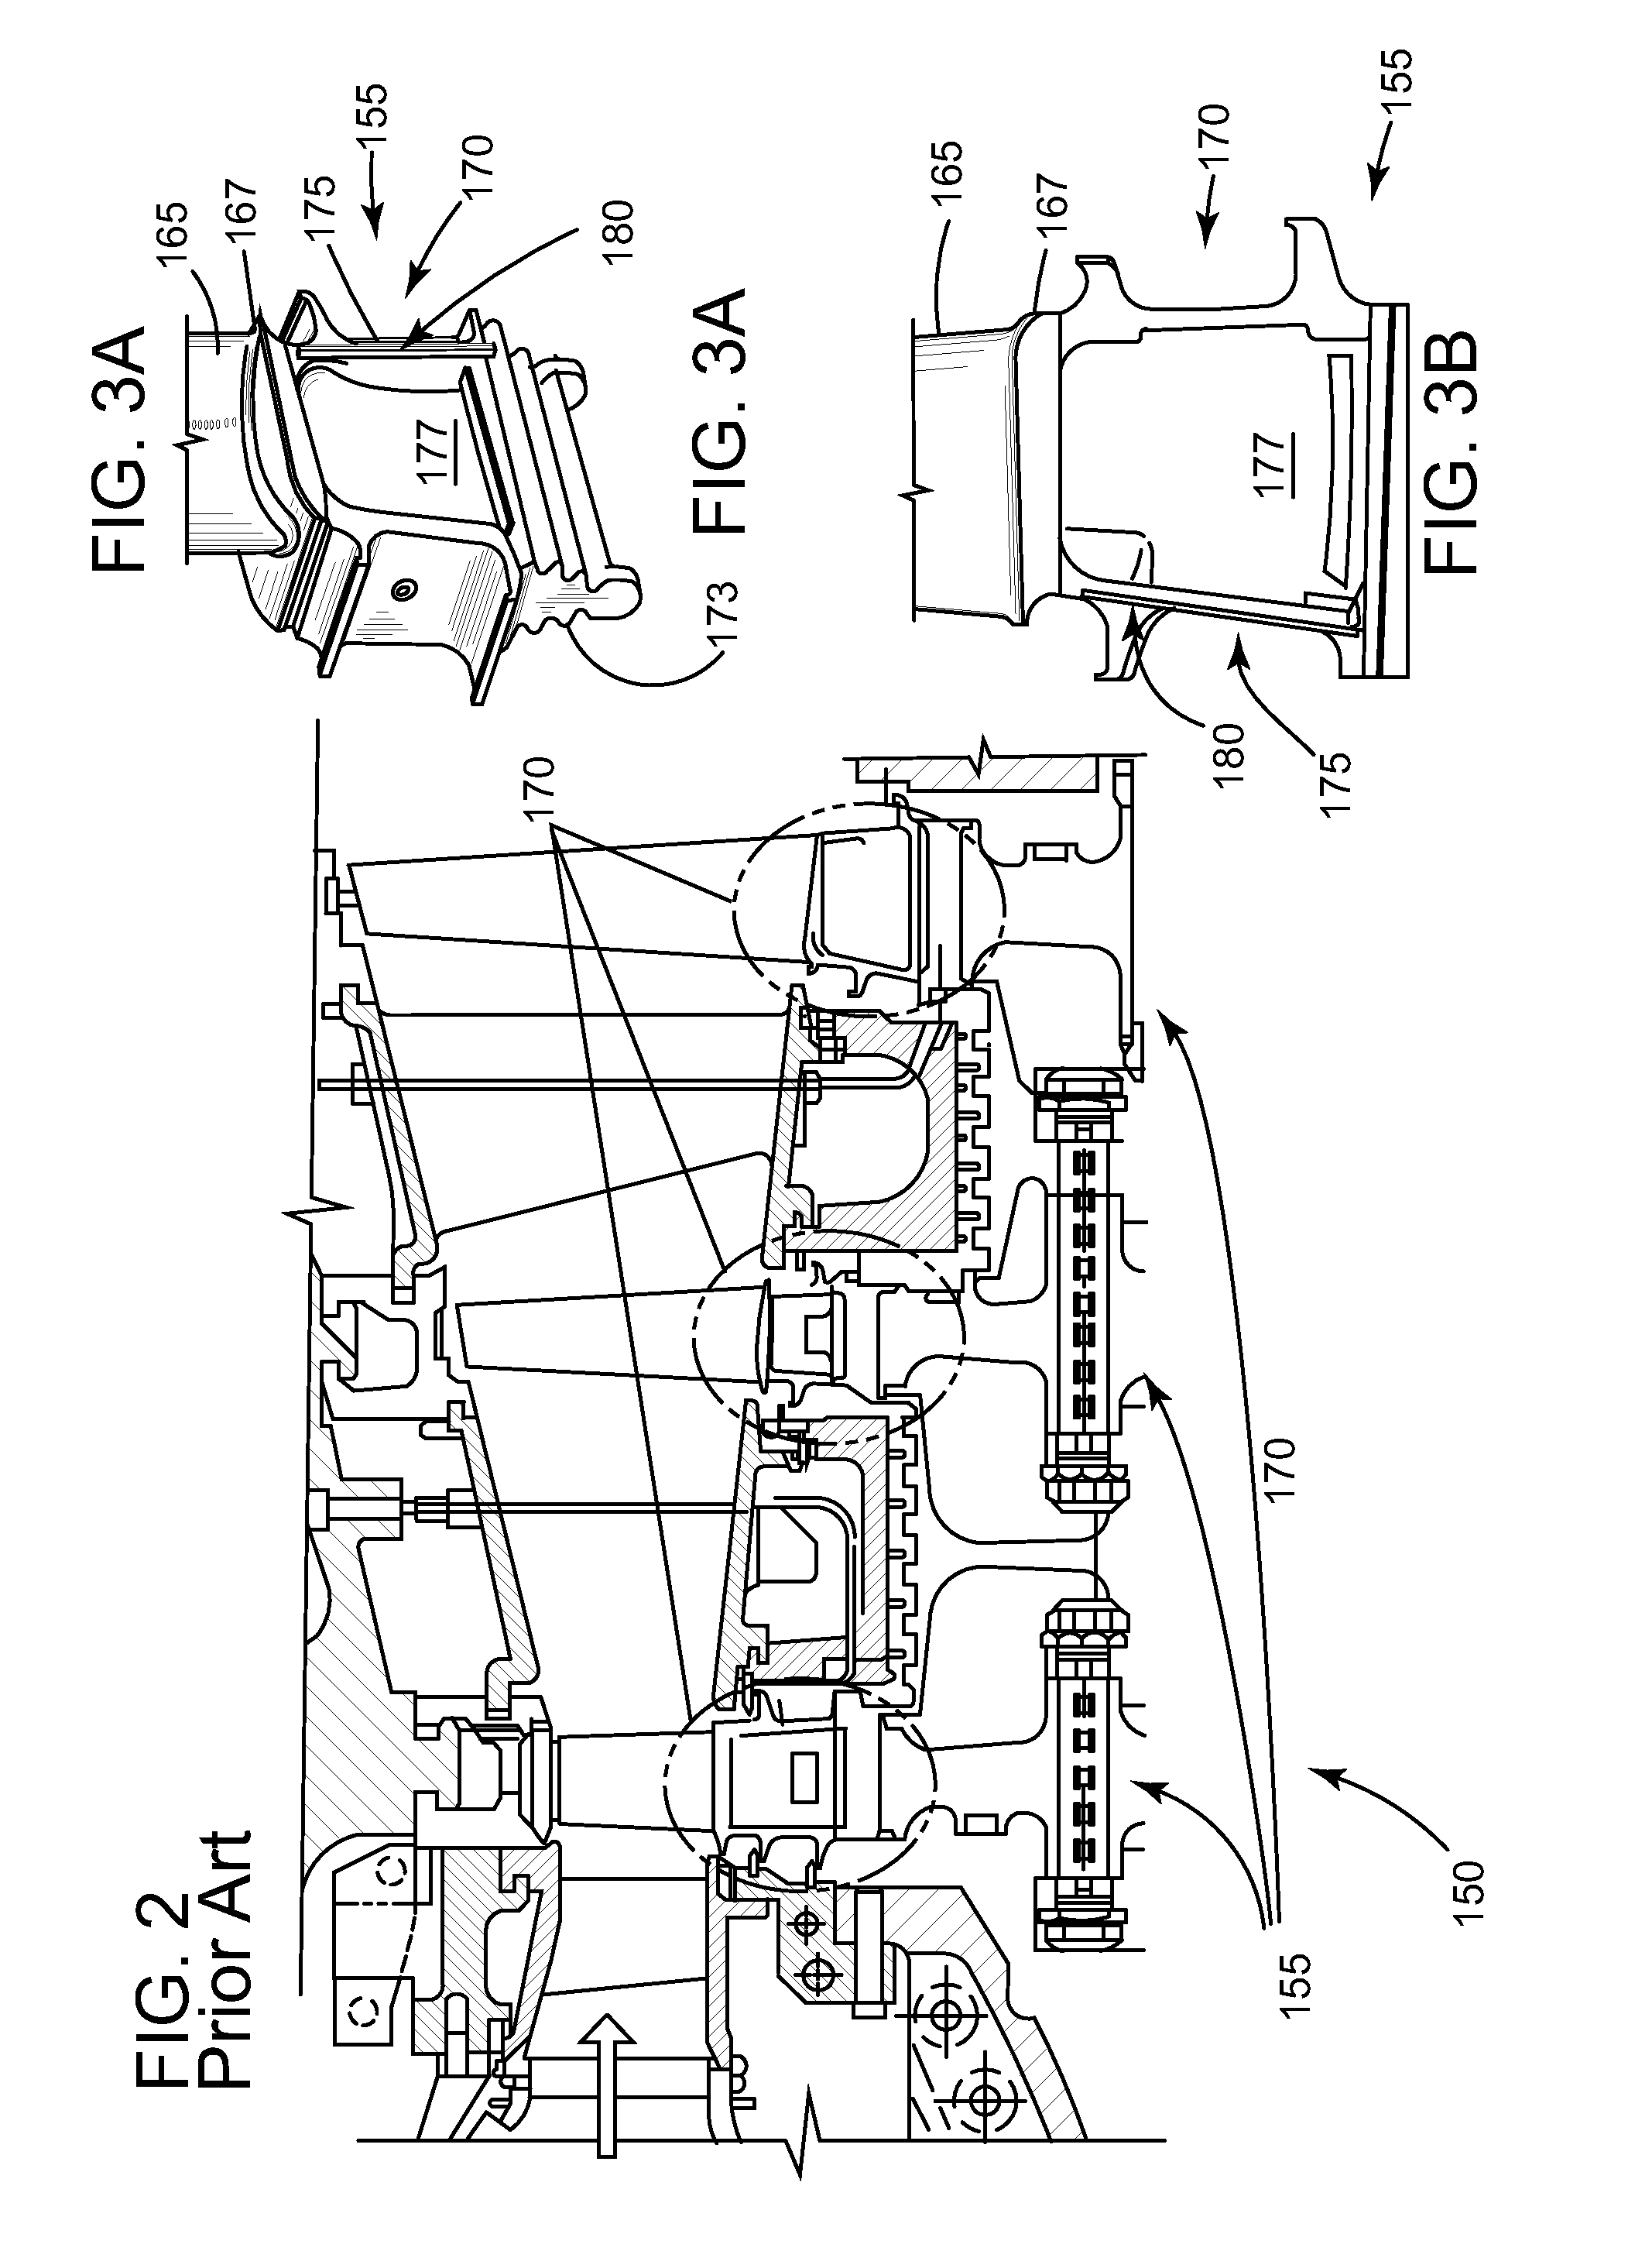 System for sealing a shaft